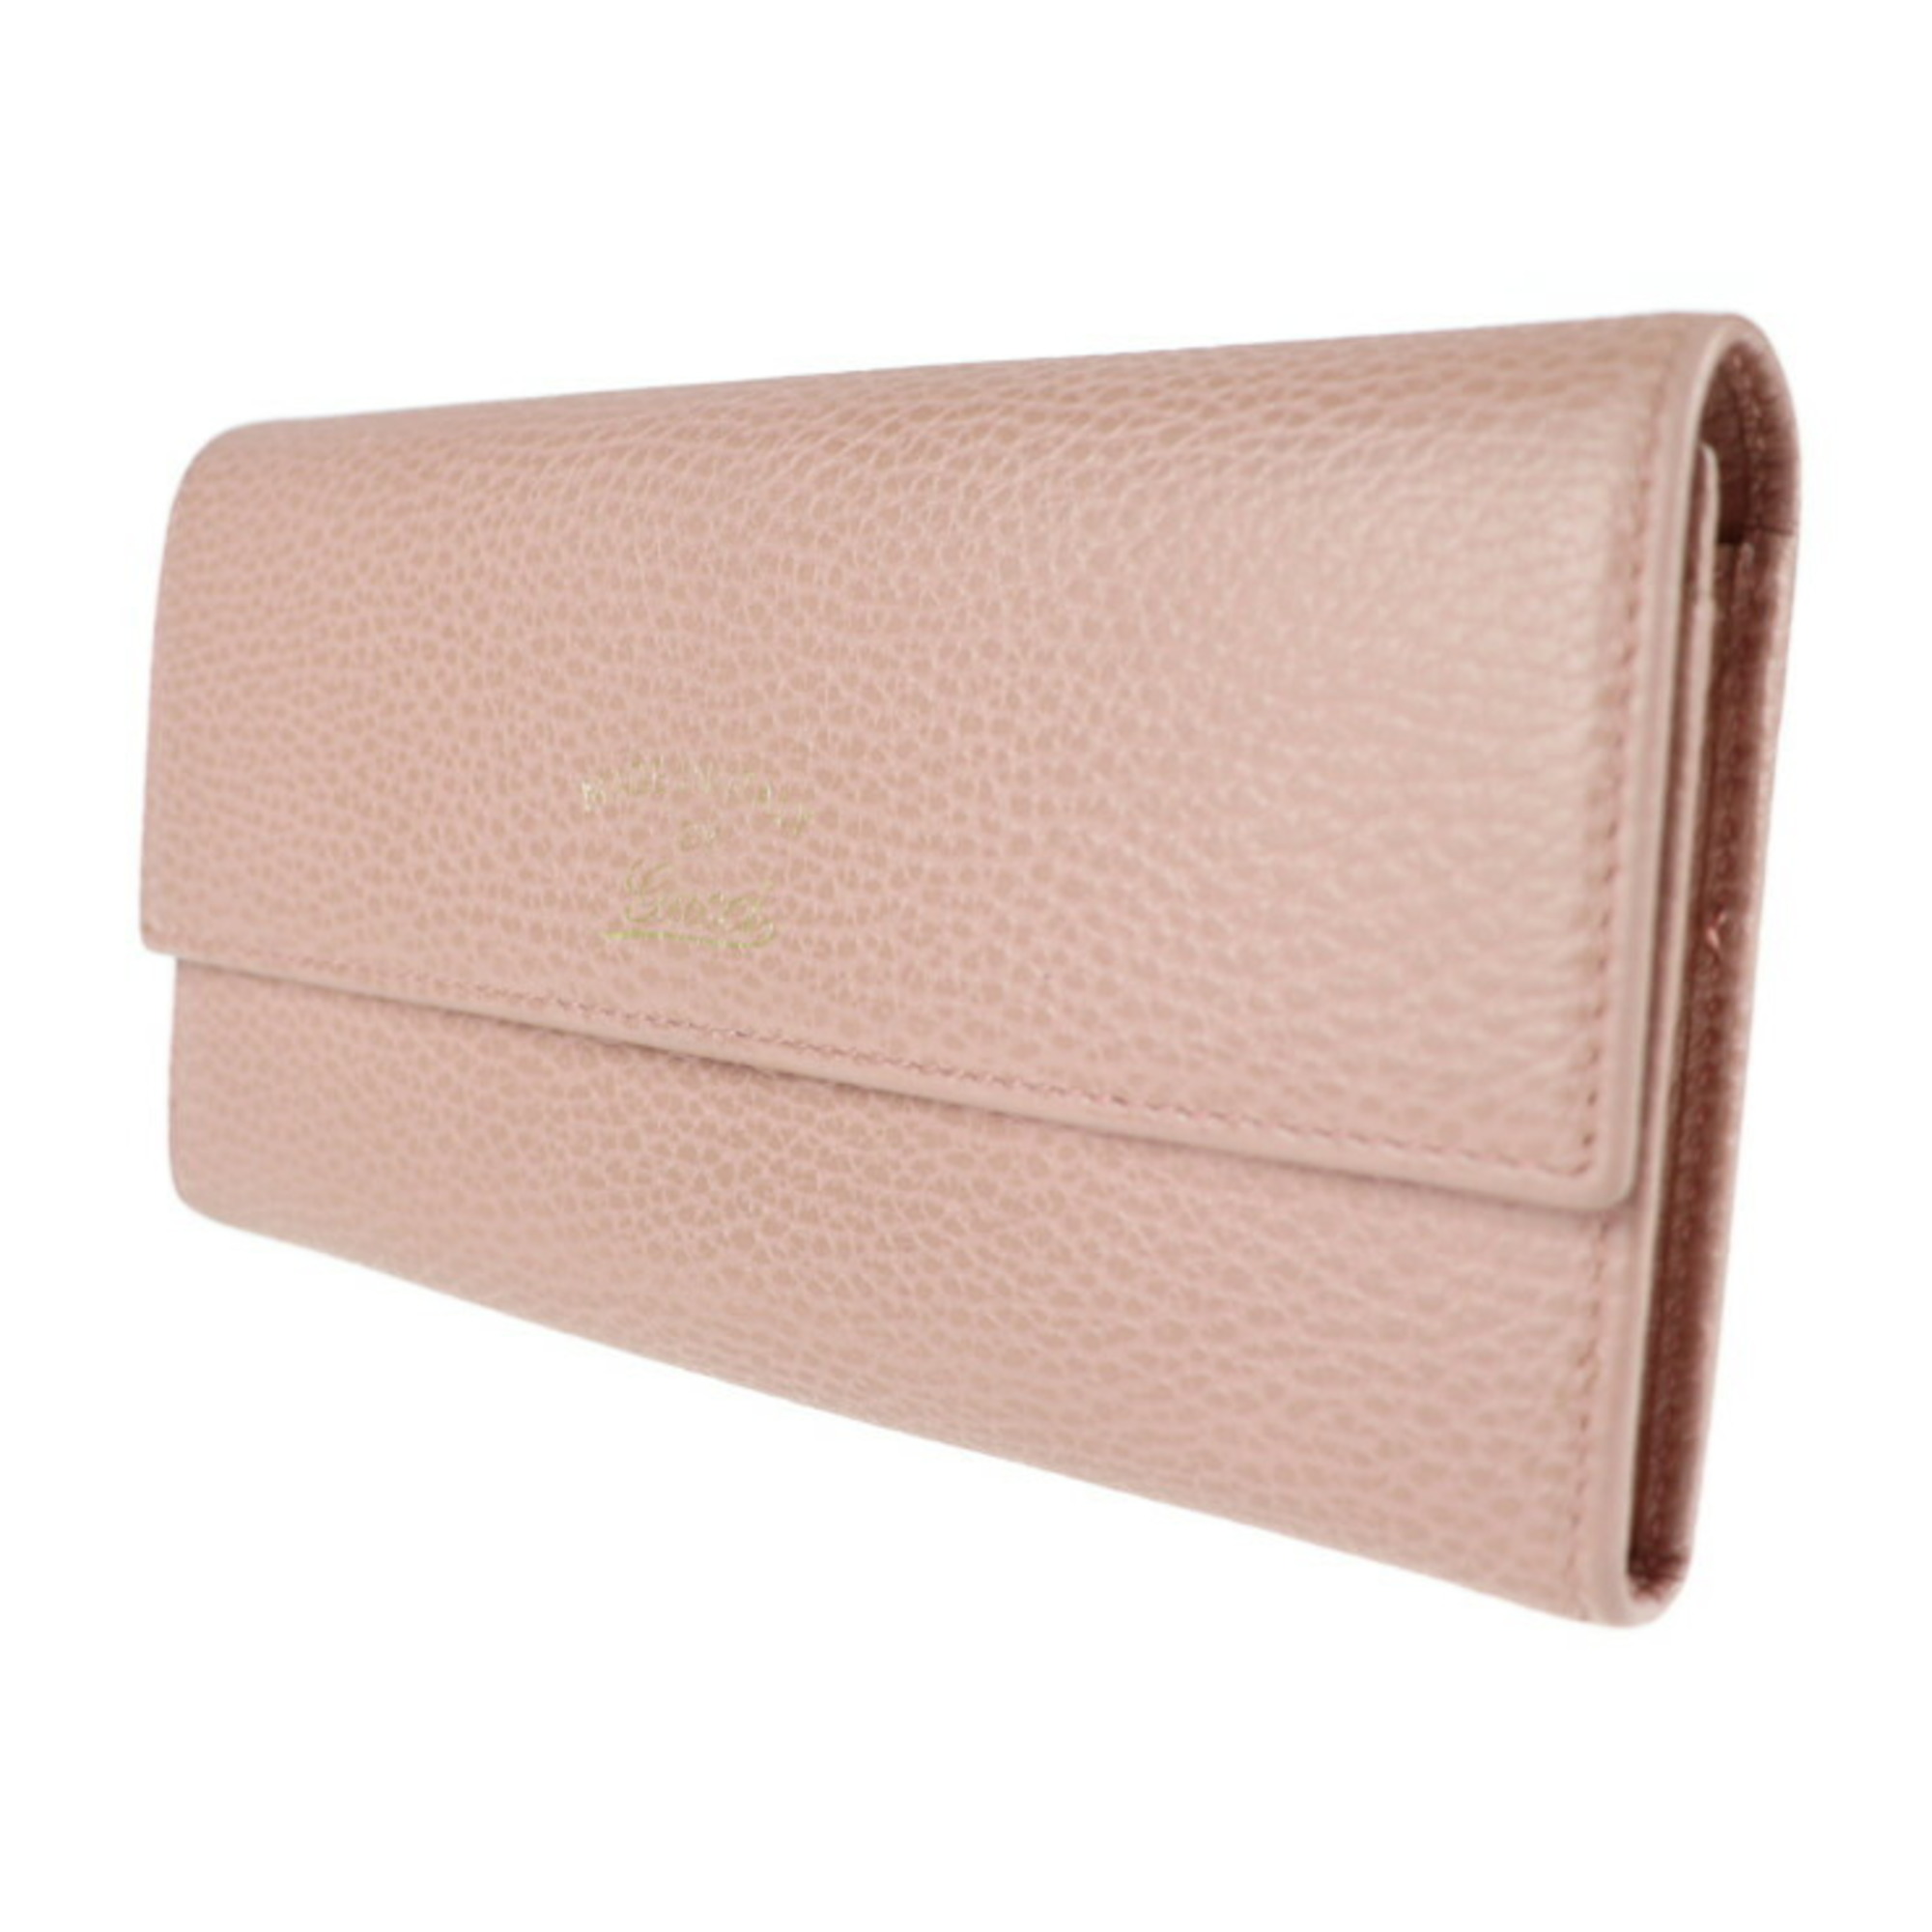 GUCCI Gucci Swing Continental Wallet Bifold 354496 Leather Pink Series Gold Hardware Long